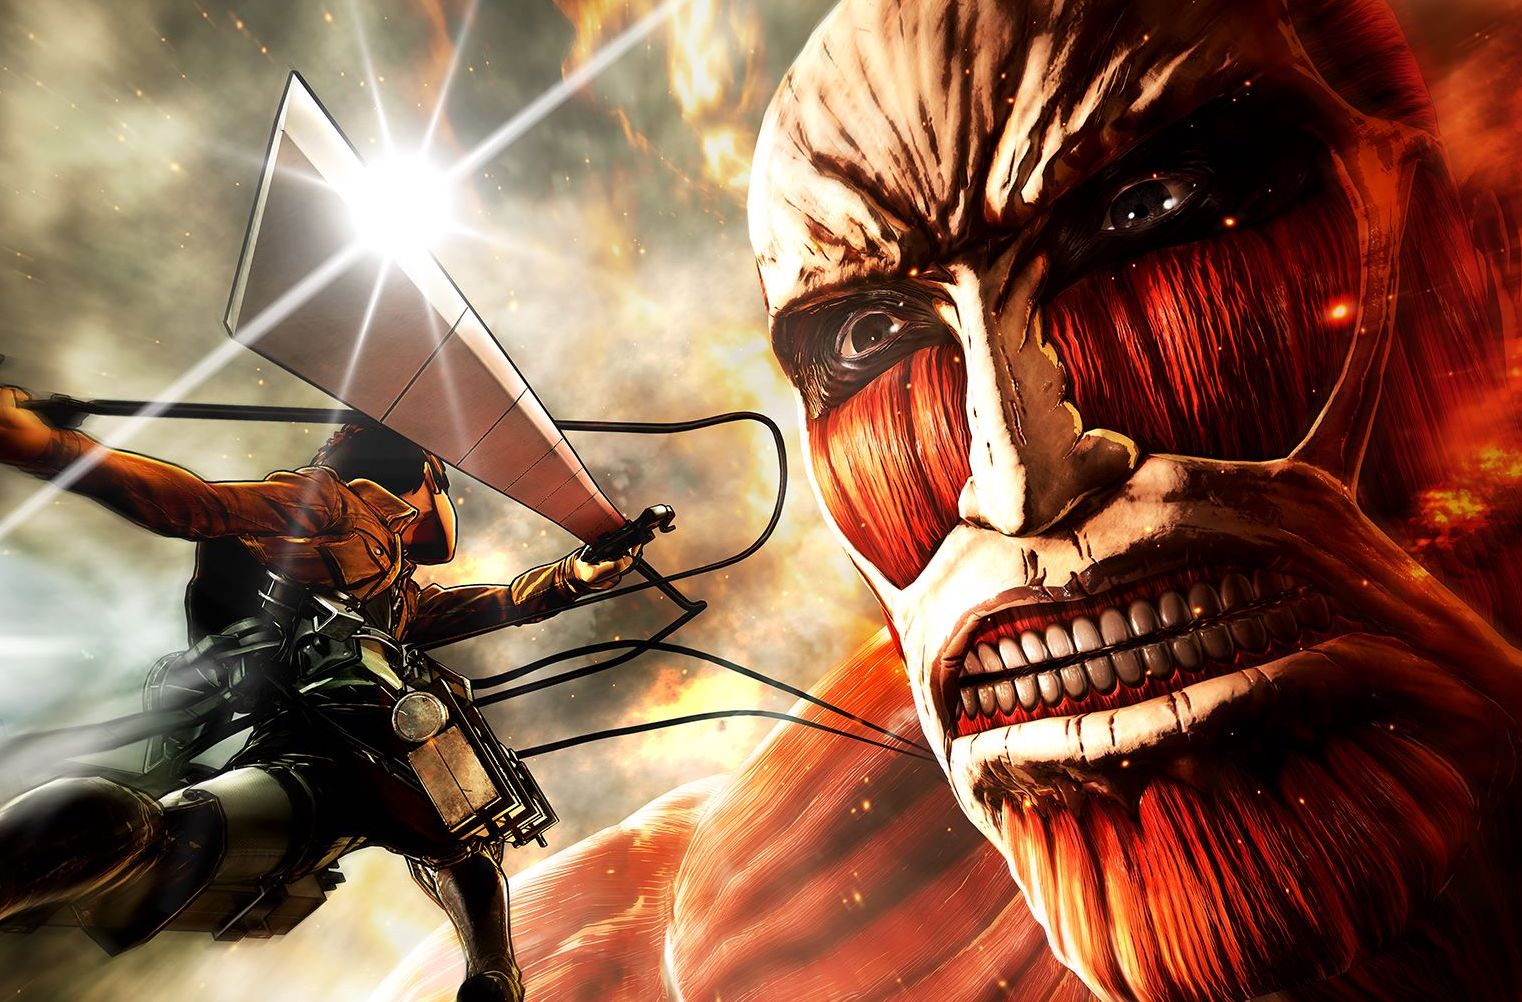 The Anime Series 'Attack on Titan' Is Getting Its Own Hollywood Adaptation